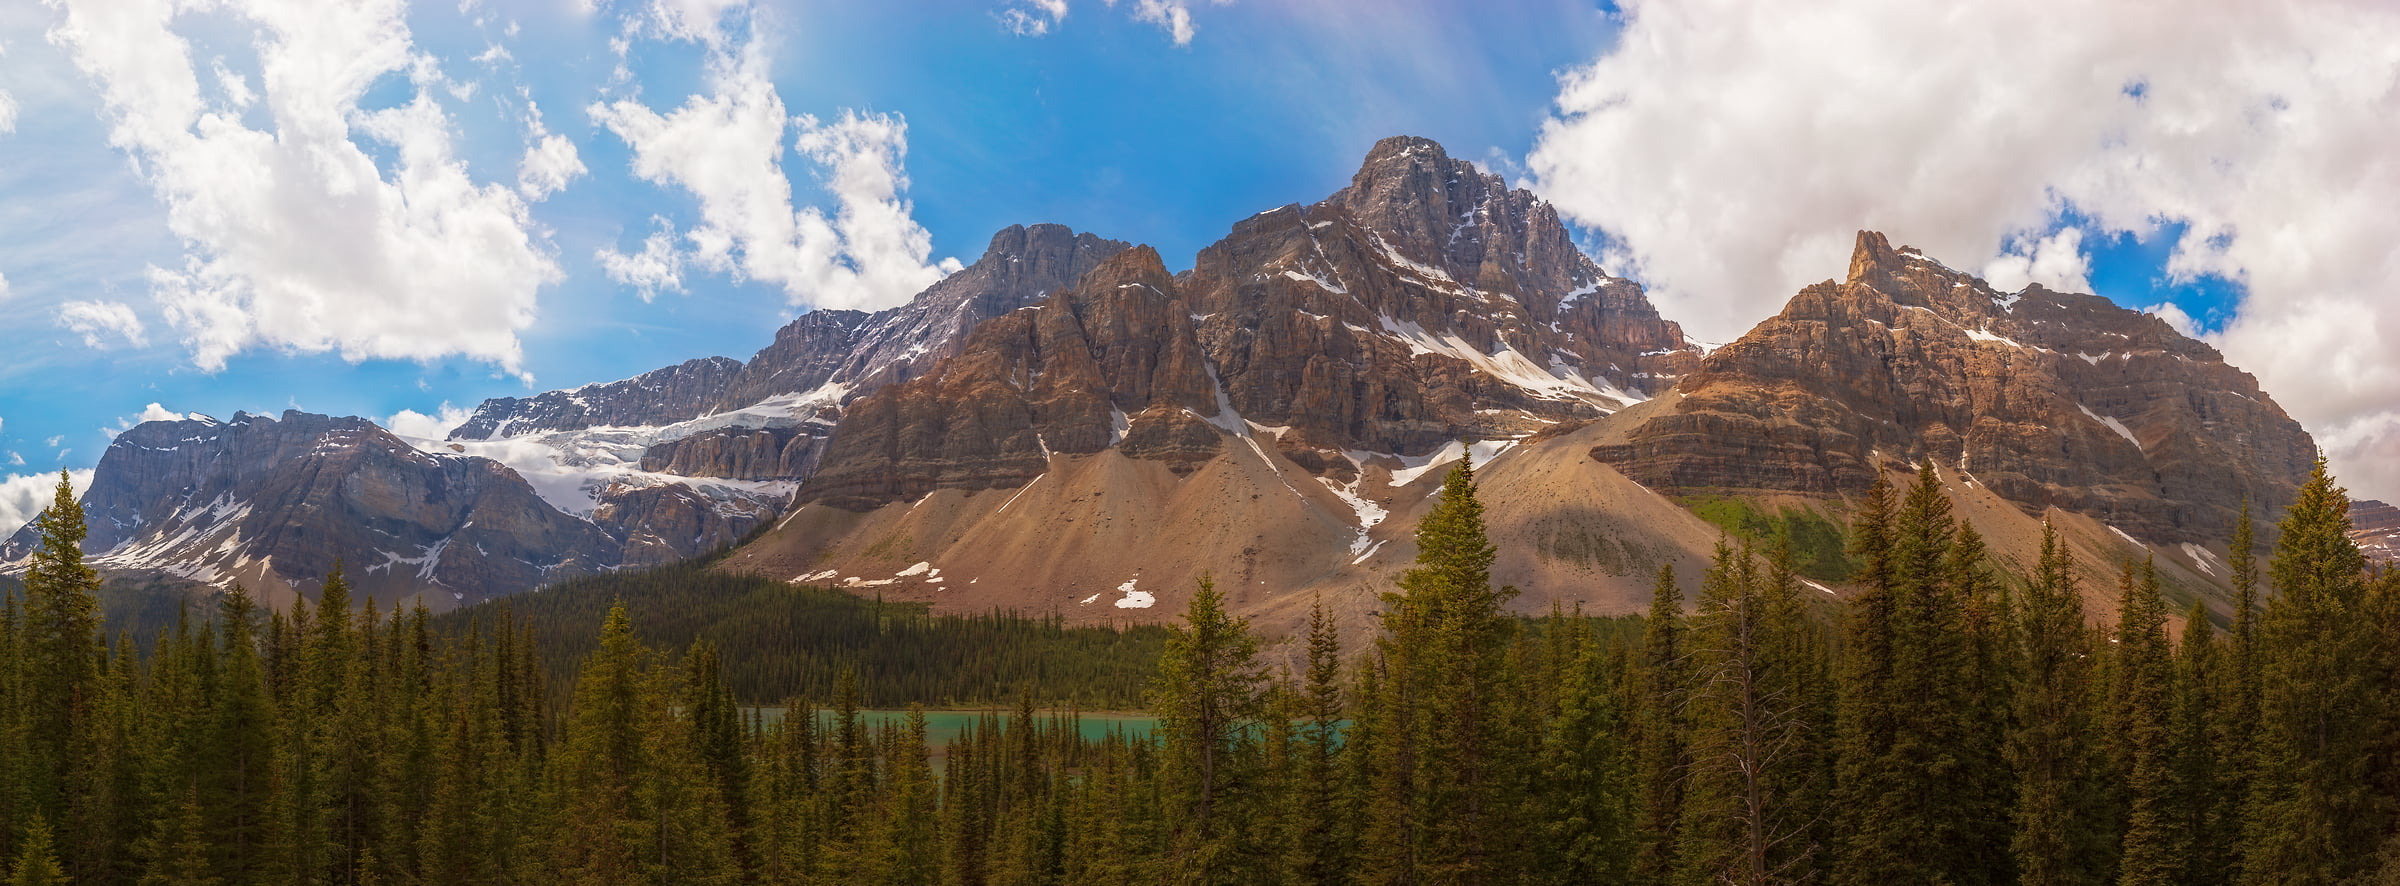 2,246 megapixels! A very high resolution, landscape wallpaper photo of a mountain range; photograph created by John Freeman in Banff National Park, Alberta, Canada.